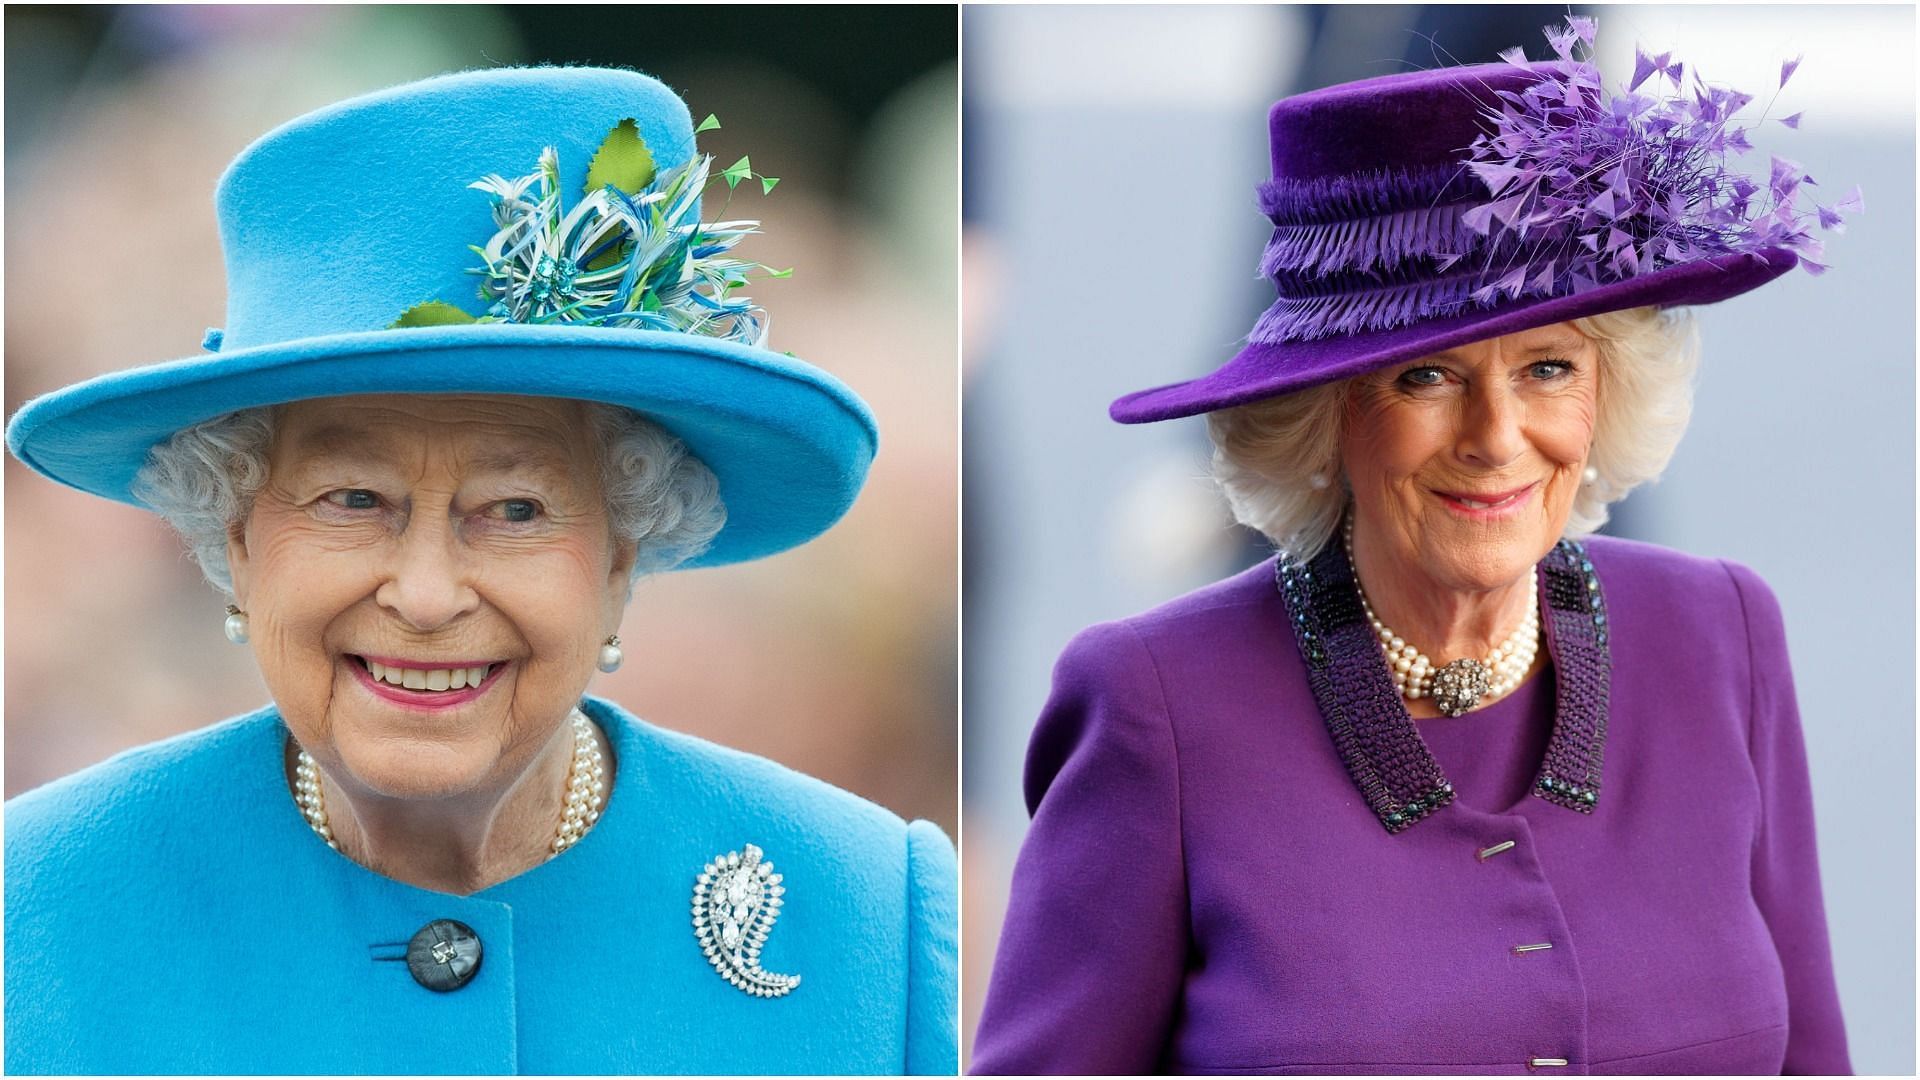 Queen Elizabeth II said that Duchess Camilla would be the future consort (Images via Samier Hussein and Max Mumby/Getty Images)